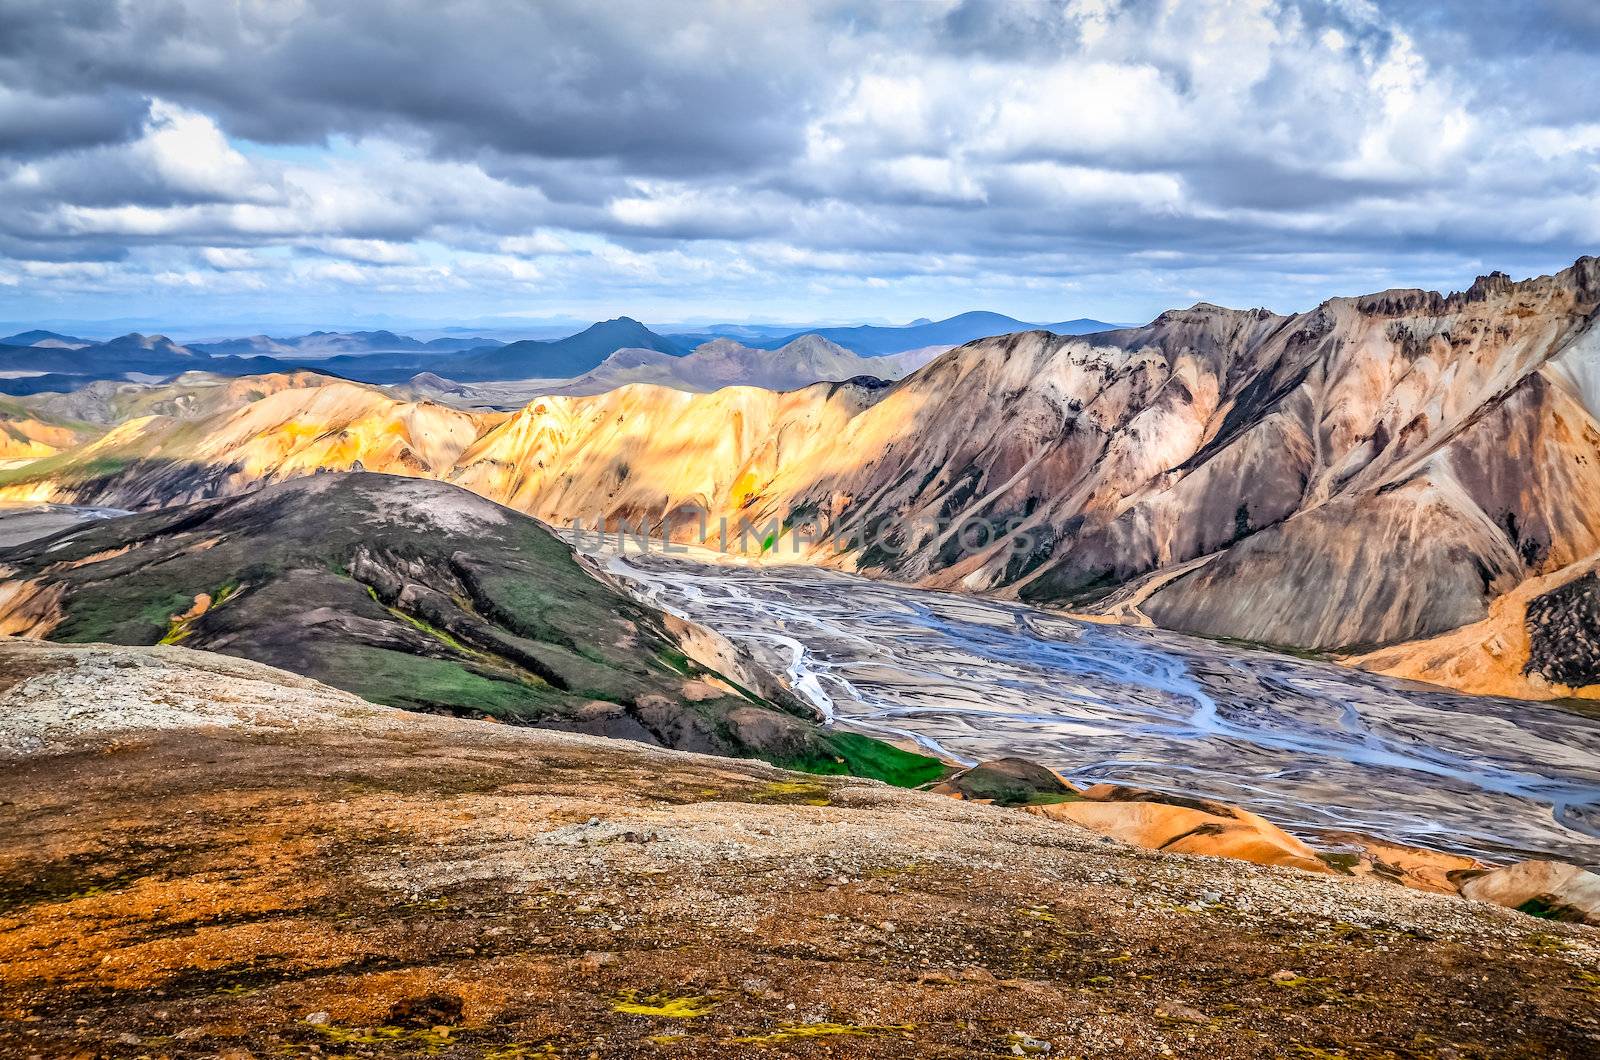 Scenic landscape view of Landmannalaugar colorful mountains, Iceland